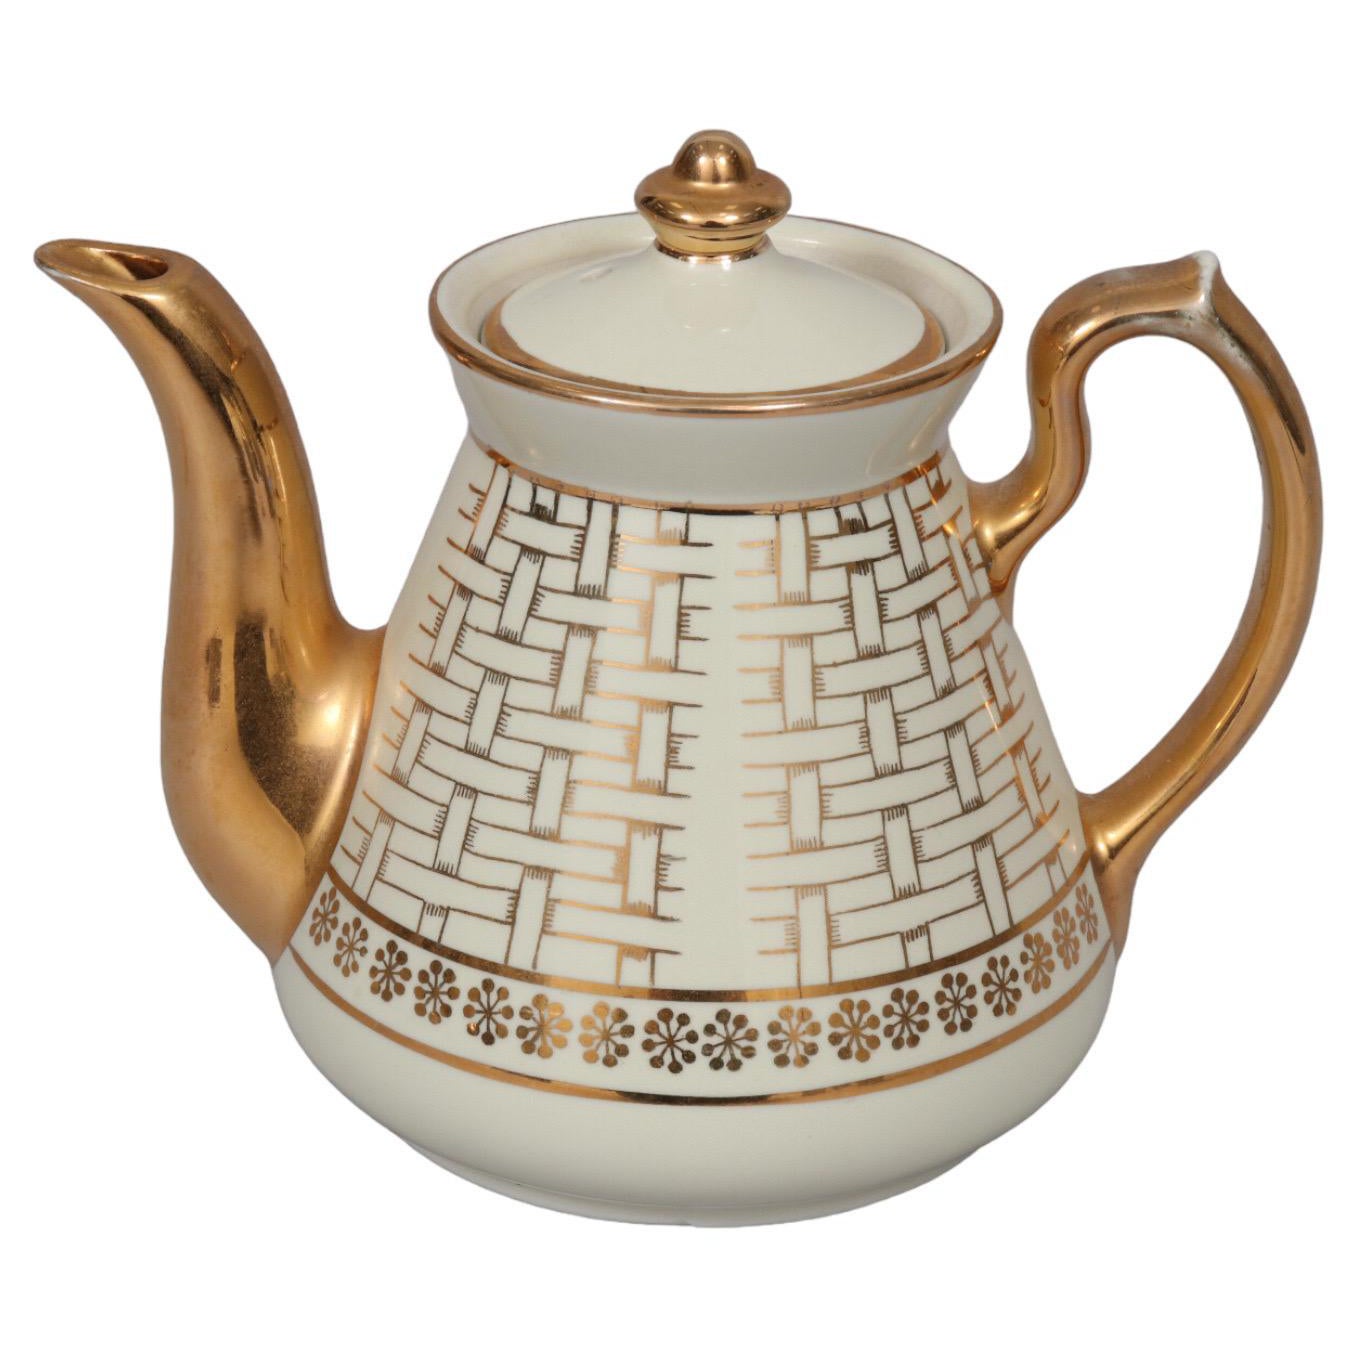 Basket Weave Ceramic Teapot by Hall's For Sale